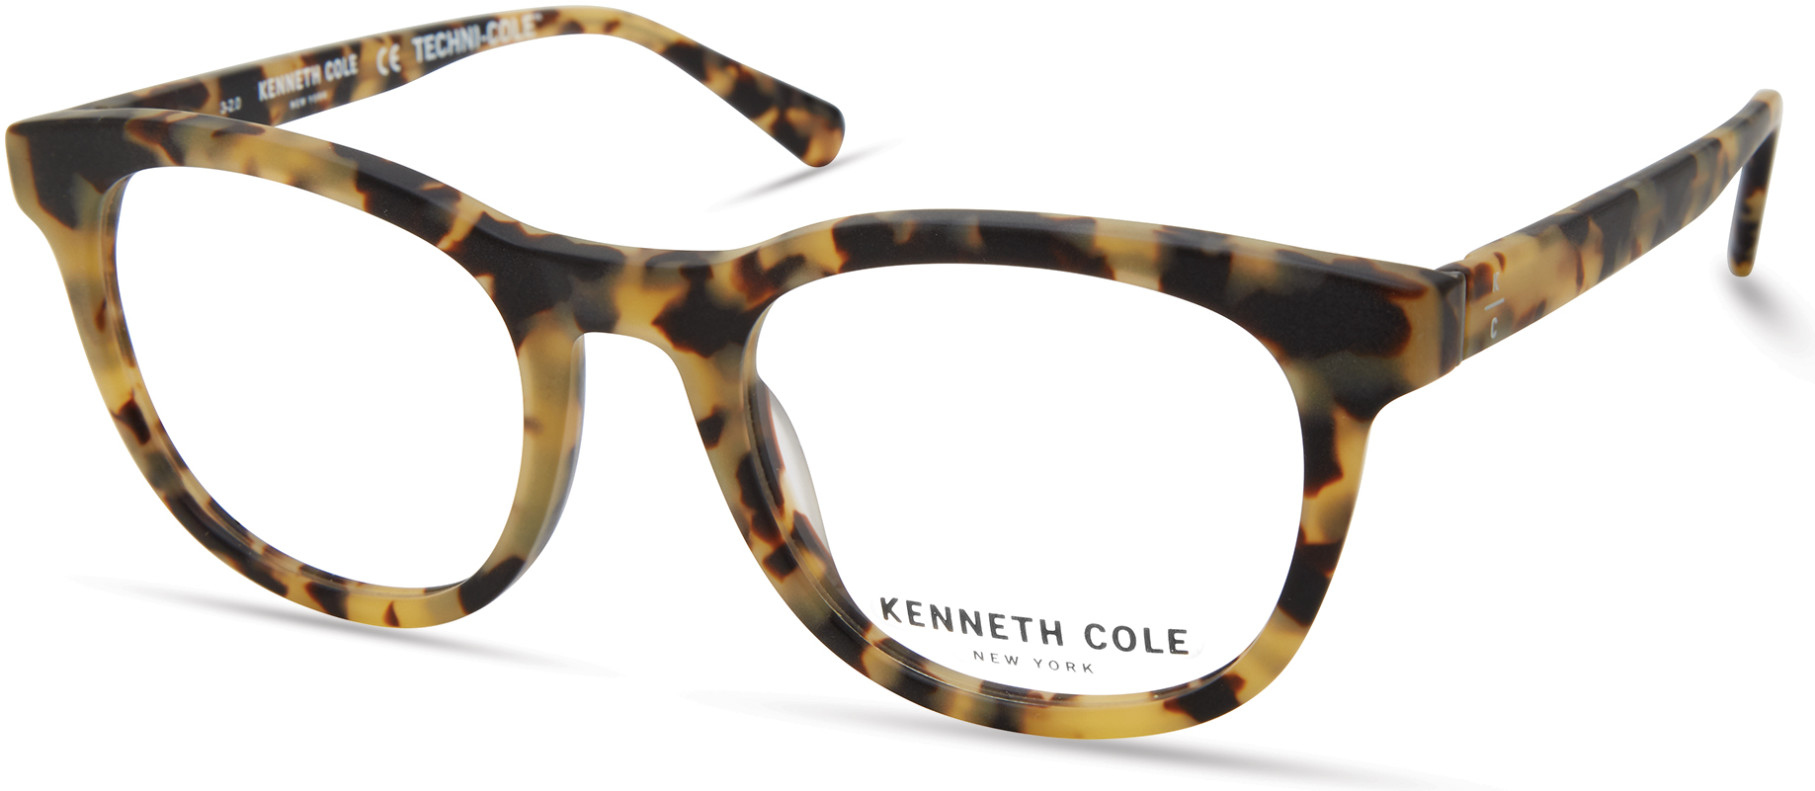 KENNETH COLE NY 0321 056